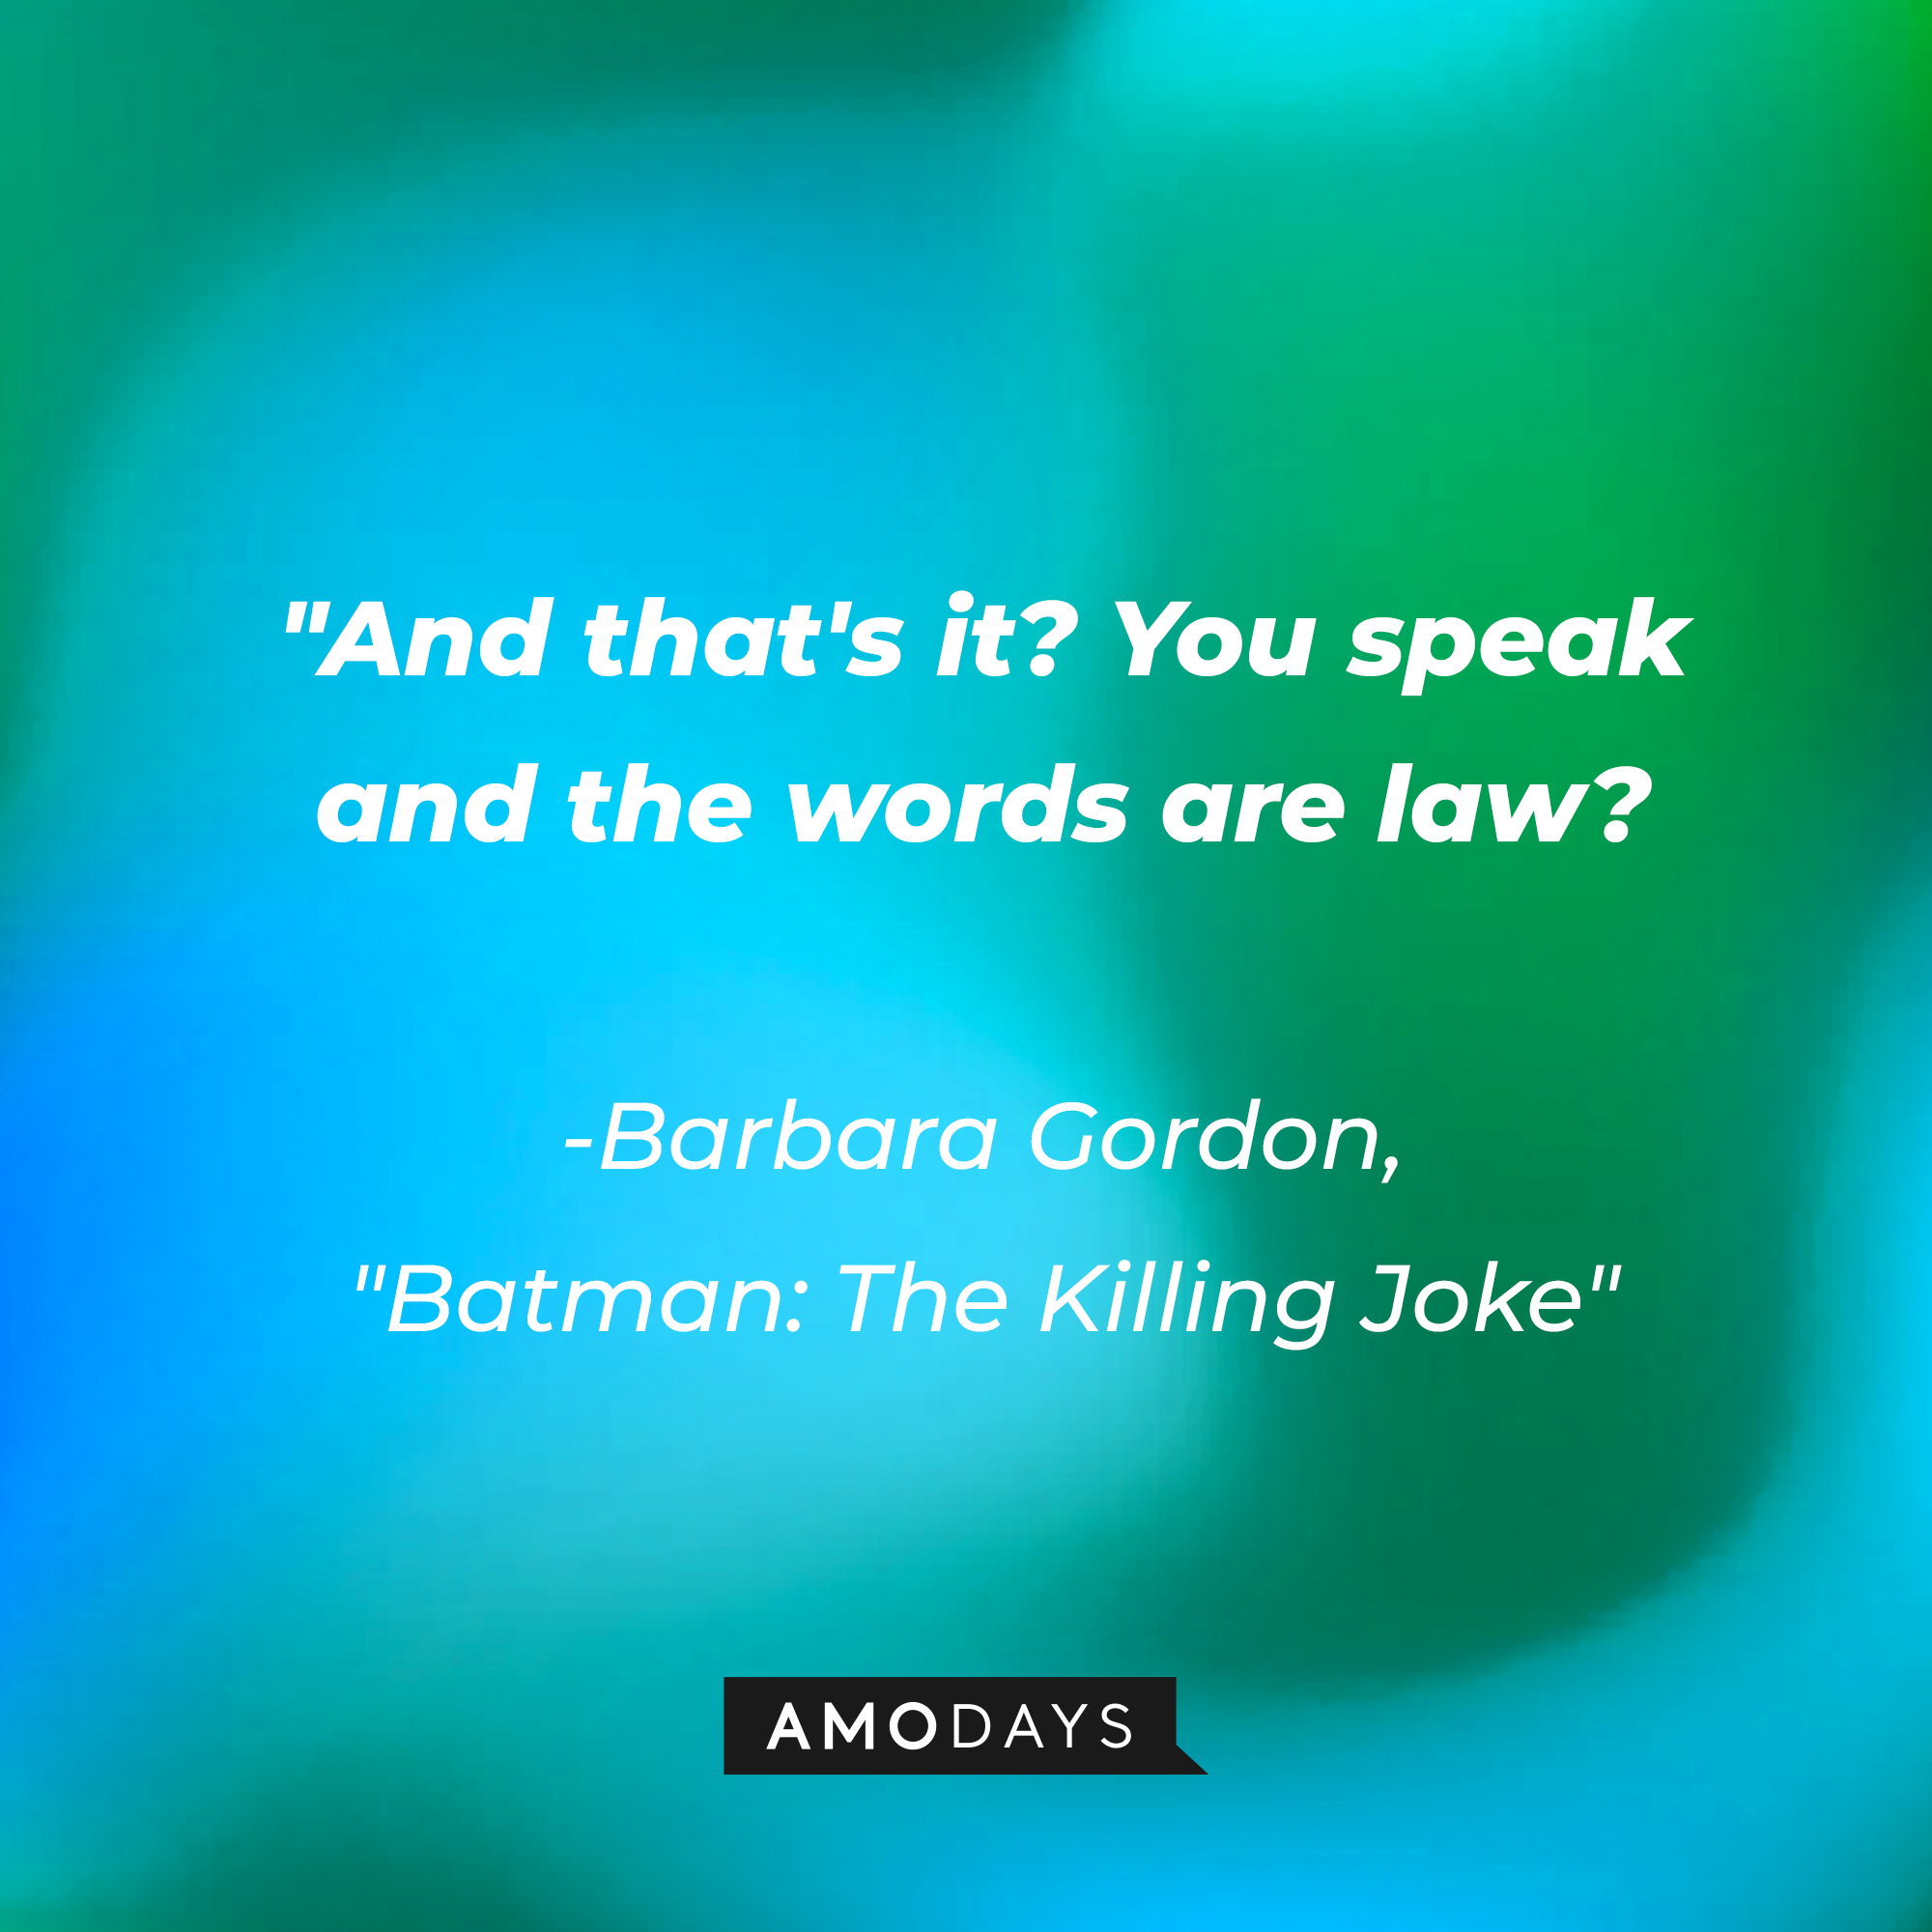 Barbara Gordon's quote from the "Batman: The Killing Joke" animated film: "And that's it? You speak and the words are law? | Source: AmoDays